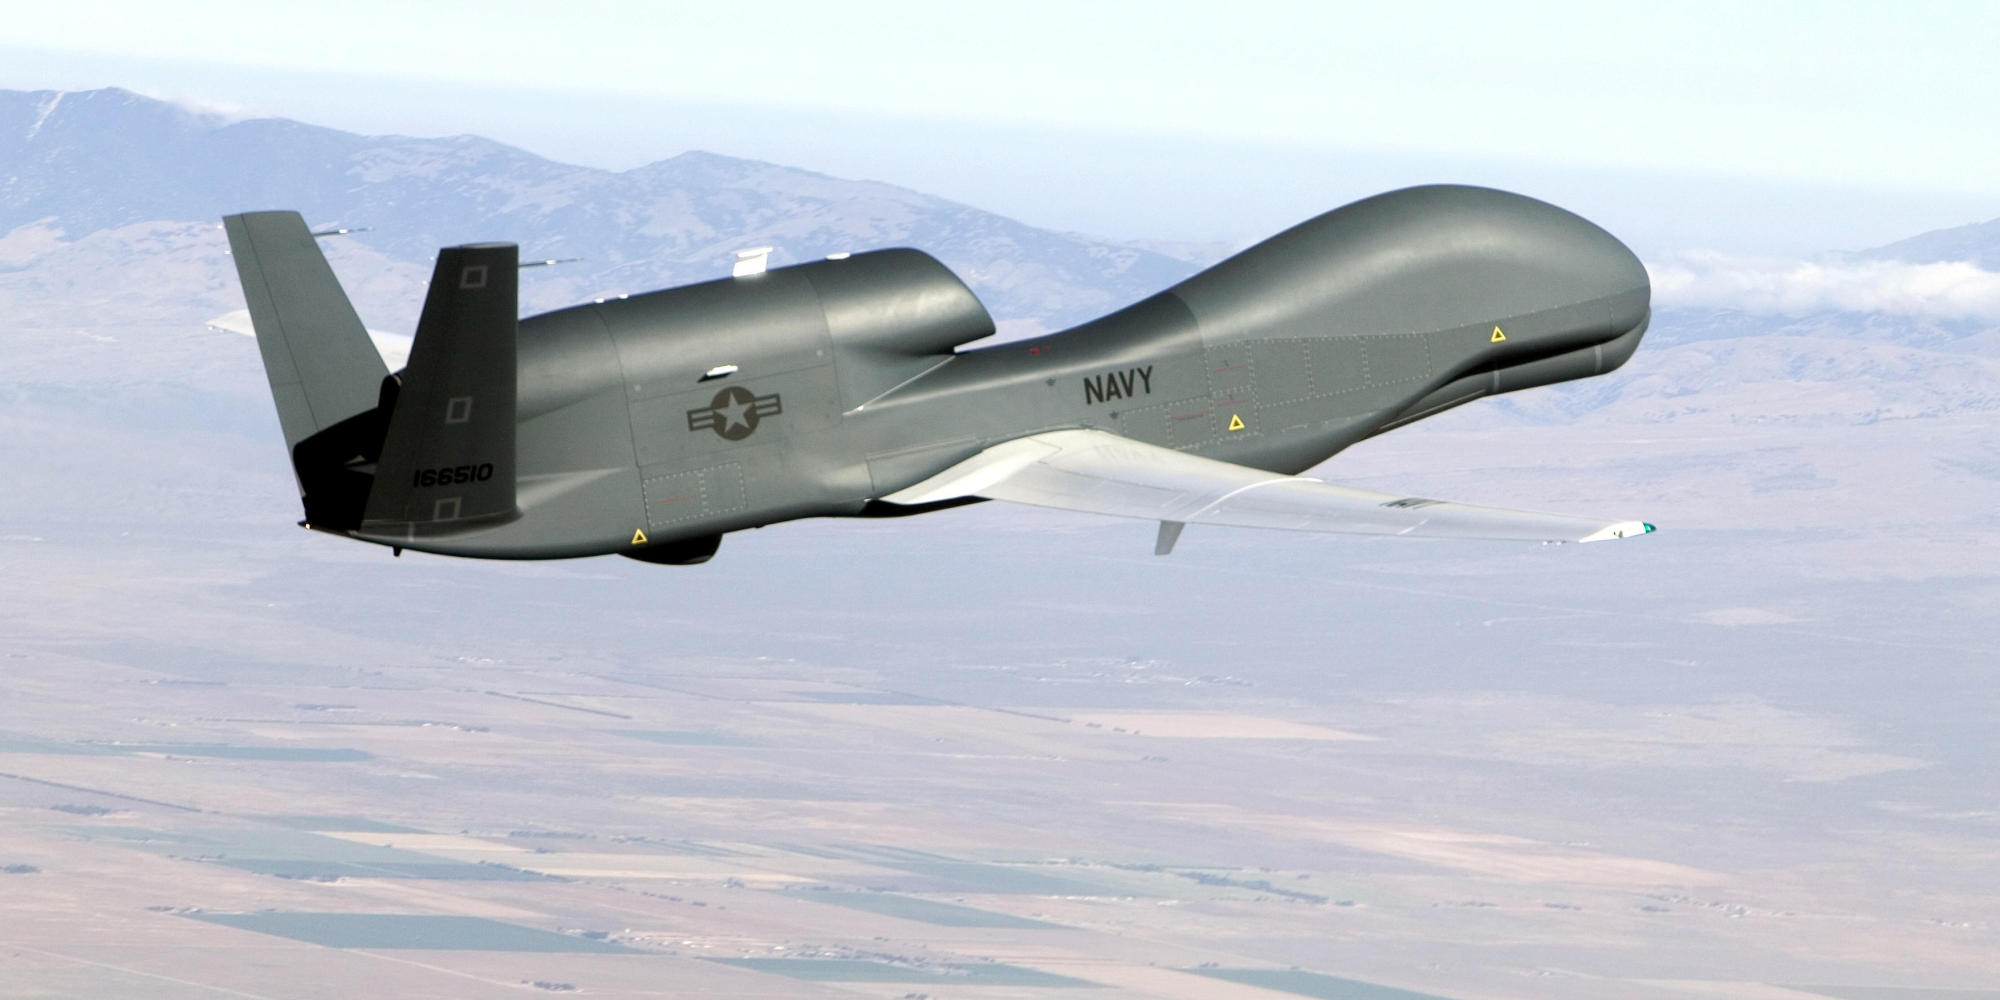 Australian Air Force to Acquire MQ-4C Triton UAS | Unmanned Systems ...